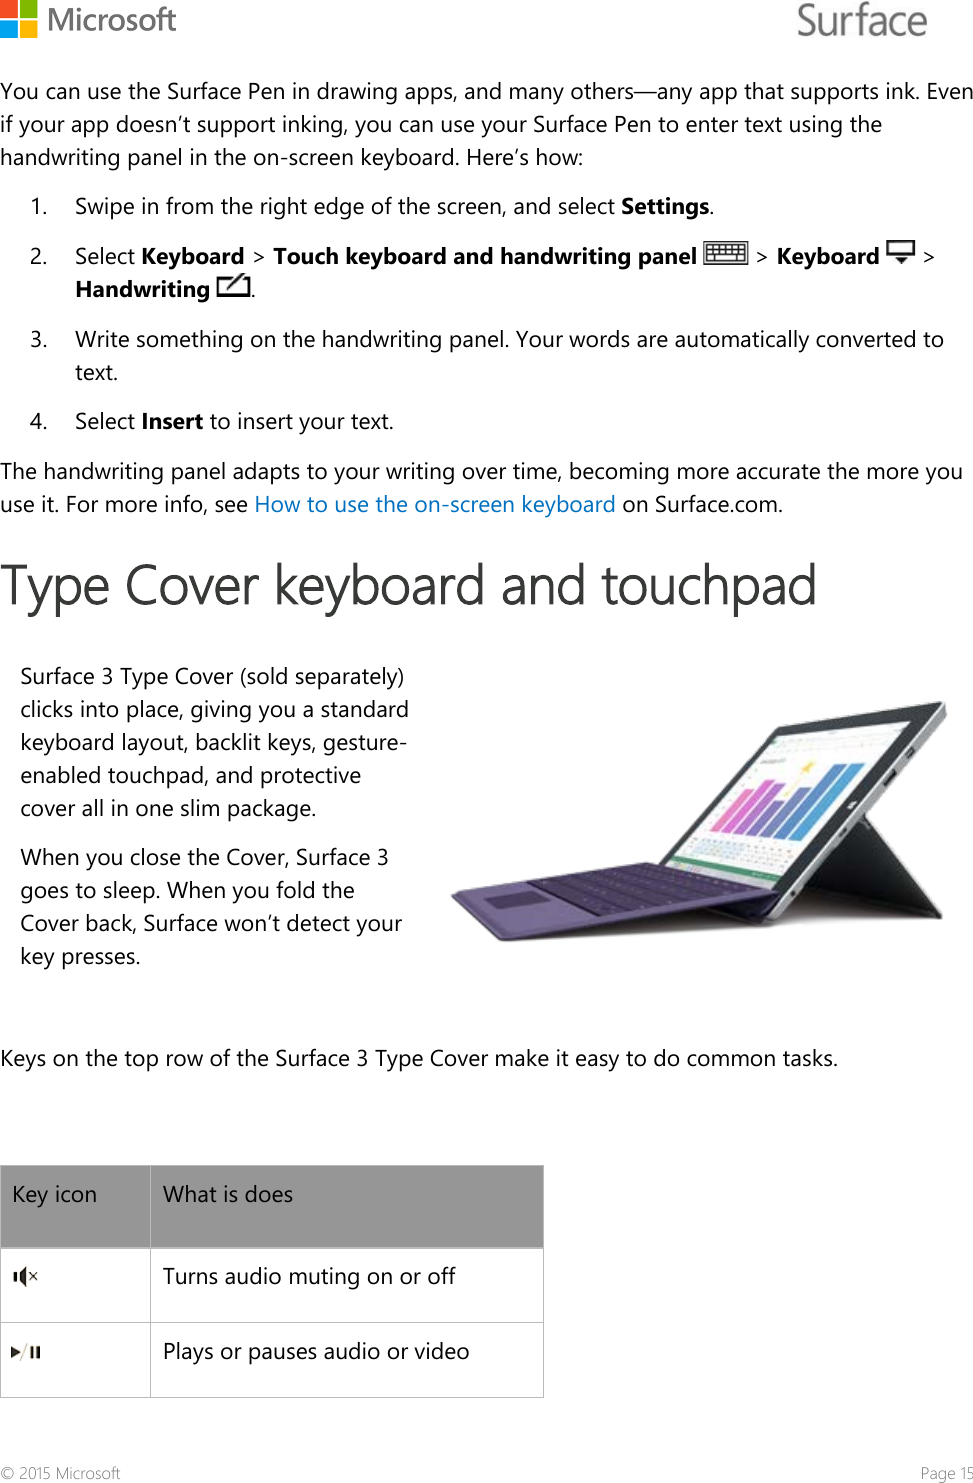    You can use the Surface Pen in drawing apps, and many others—any app that supports ink. Even if your app doesn’t support inking, you can use your Surface Pen to enter text using the handwriting panel in the on-screen keyboard. Here’s how: 1. Swipe in from the right edge of the screen, and select Settings.  2. Select Keyboard &gt; Touch keyboard and handwriting panel   &gt; Keyboard   &gt; Handwriting .  3. Write something on the handwriting panel. Your words are automatically converted to text. 4. Select Insert to insert your text. The handwriting panel adapts to your writing over time, becoming more accurate the more you use it. For more info, see How to use the on-screen keyboard on Surface.com. Type Cover keyboard and touchpad  Surface 3 Type Cover (sold separately) clicks into place, giving you a standard keyboard layout, backlit keys, gesture-enabled touchpad, and protective cover all in one slim package.  When you close the Cover, Surface 3 goes to sleep. When you fold the Cover back, Surface won’t detect your key presses.   Keys on the top row of the Surface 3 Type Cover make it easy to do common tasks.    Key icon What is does  Turns audio muting on or off  Plays or pauses audio or video © 2015 Microsoft    Page 15 